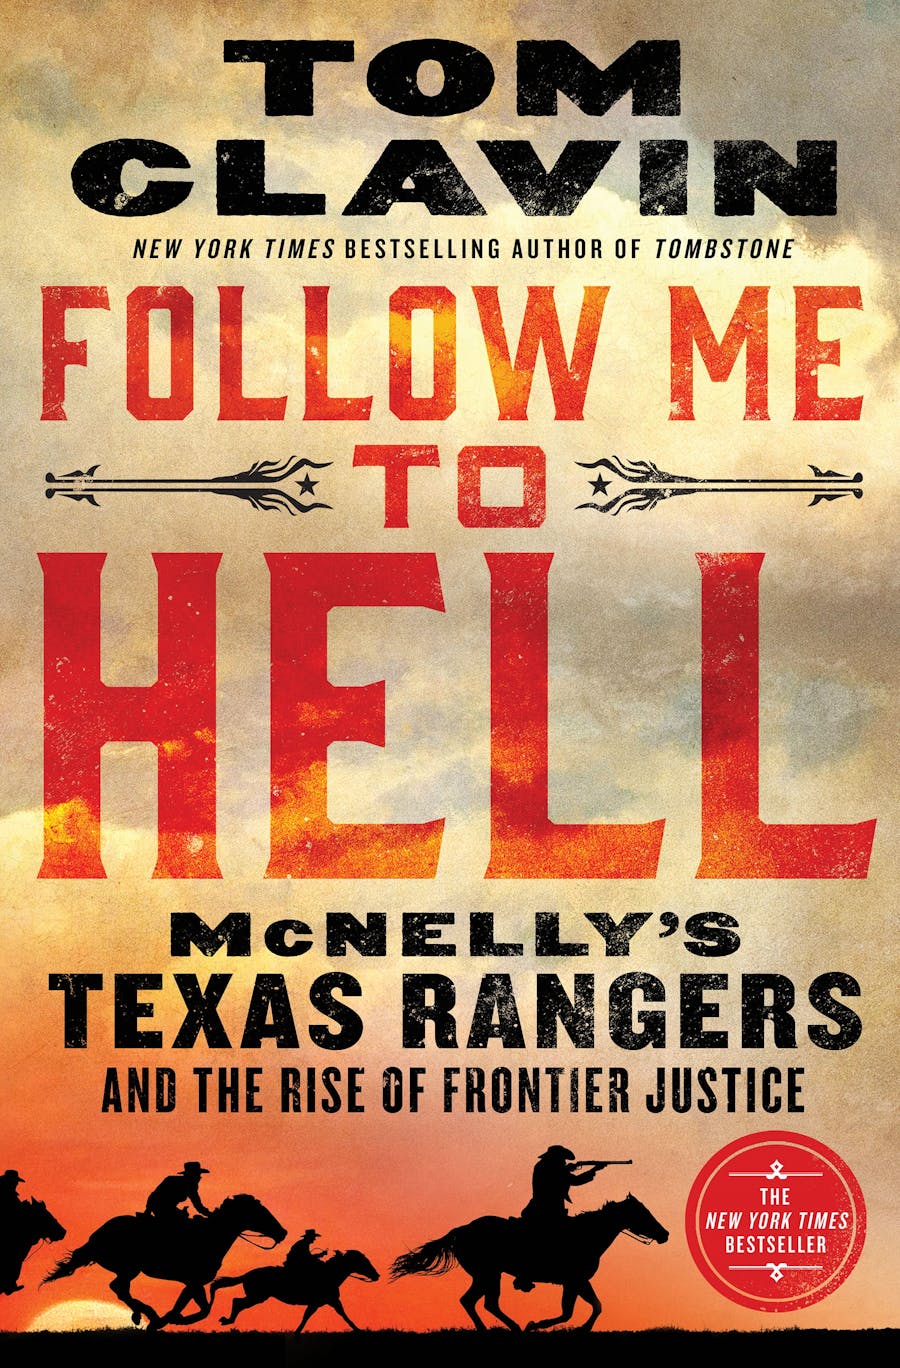 Follow Me to Hell cover links to review